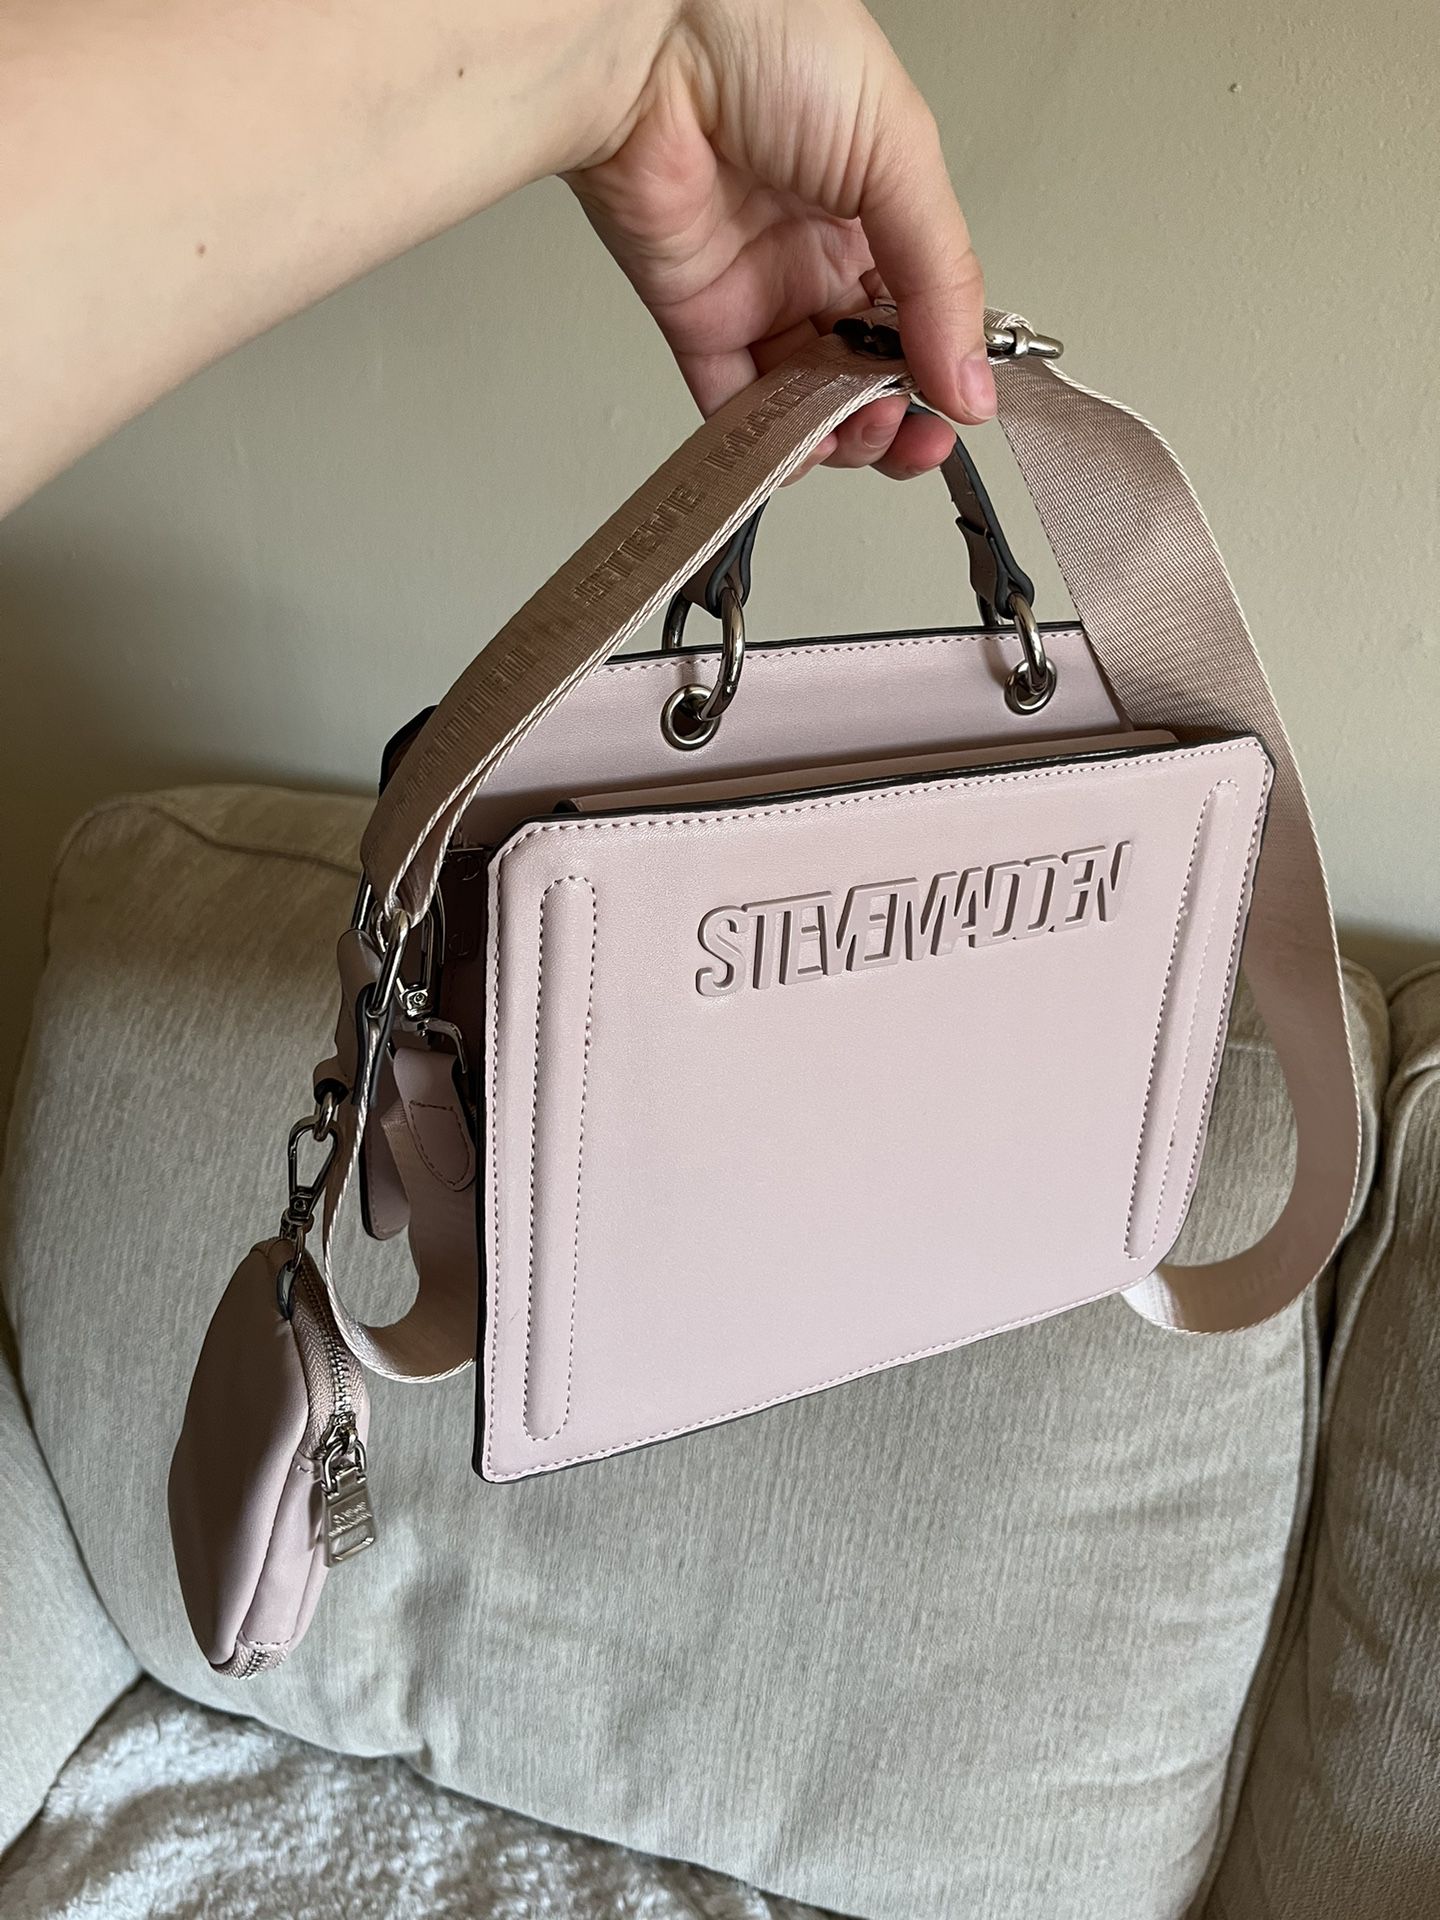 Steve Madden Crossbody Bag for Sale in Chicago, IL - OfferUp